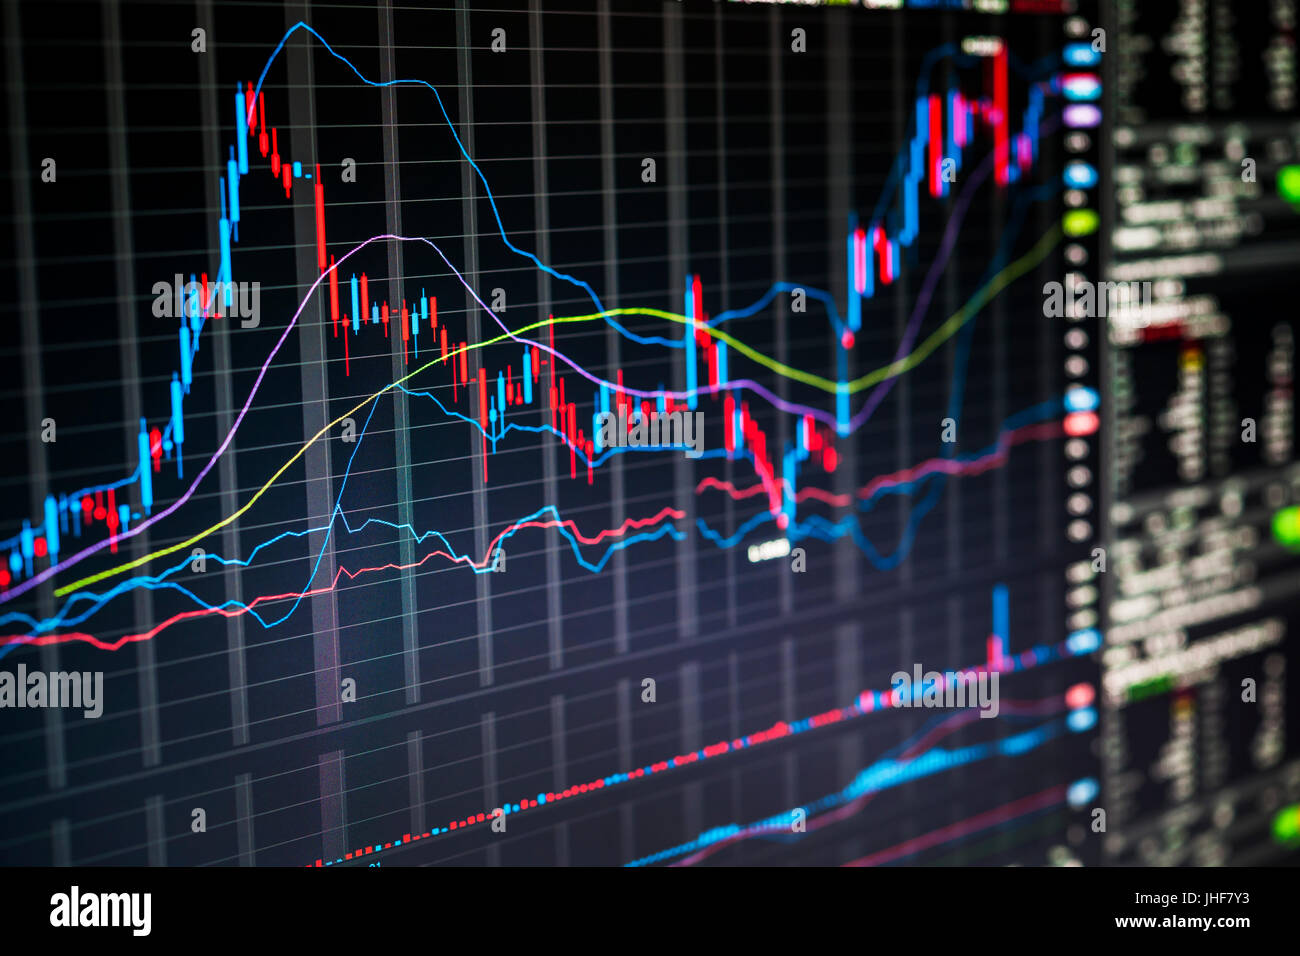 Stock market charts and numbers displayed on trading screen of online investing platform Stock Photo